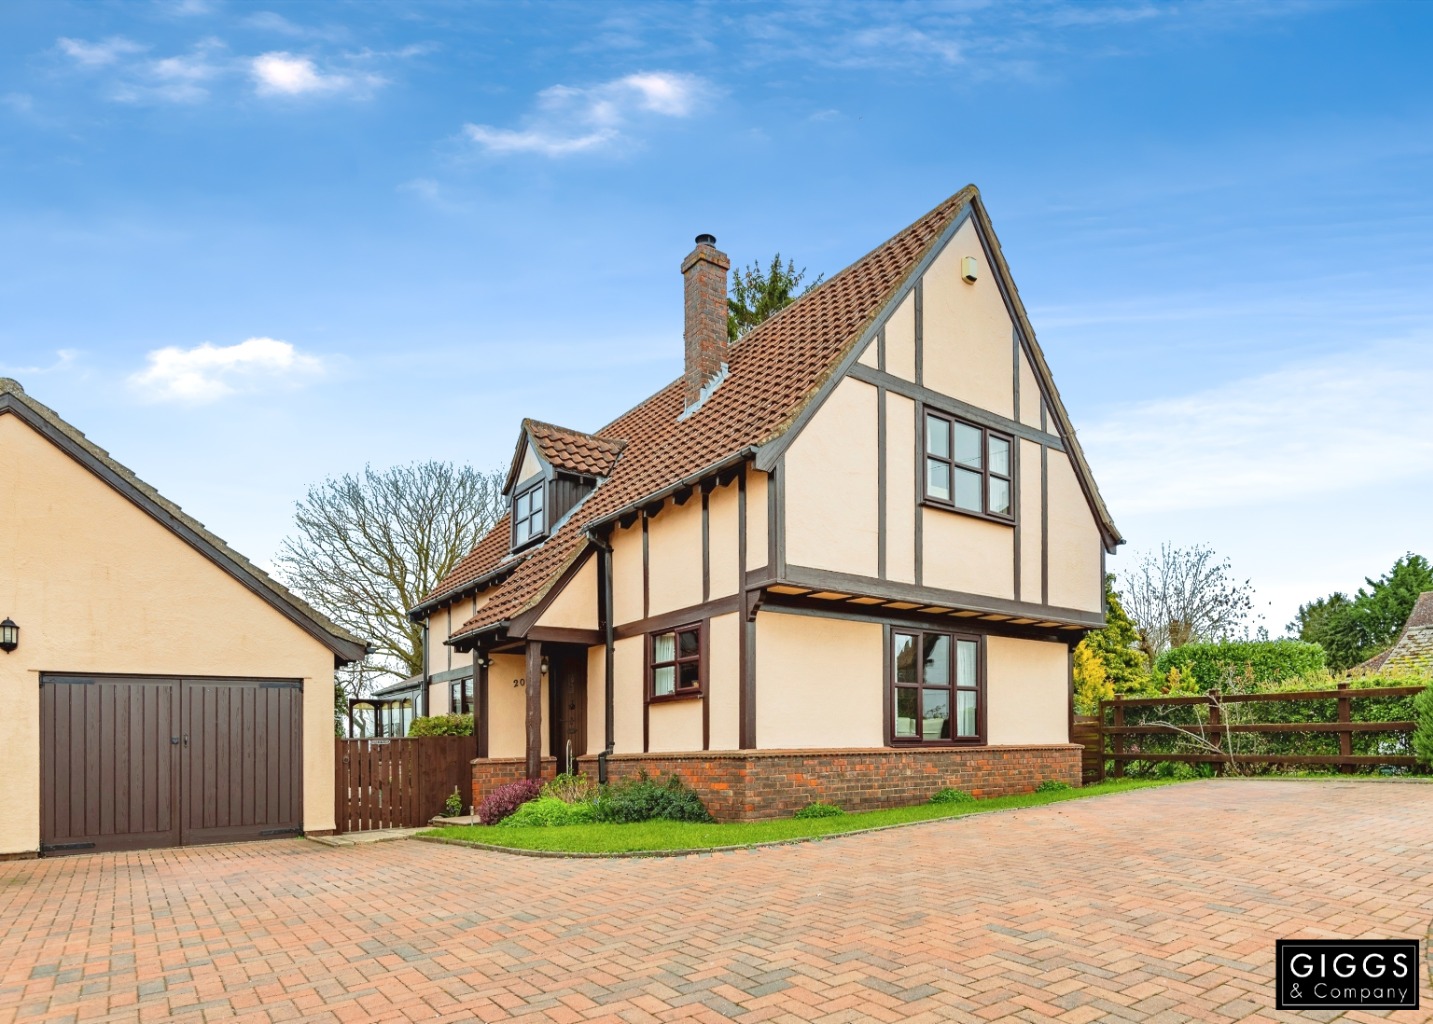 3 bed detached house for sale in High Street, St Neots - Property Image 1